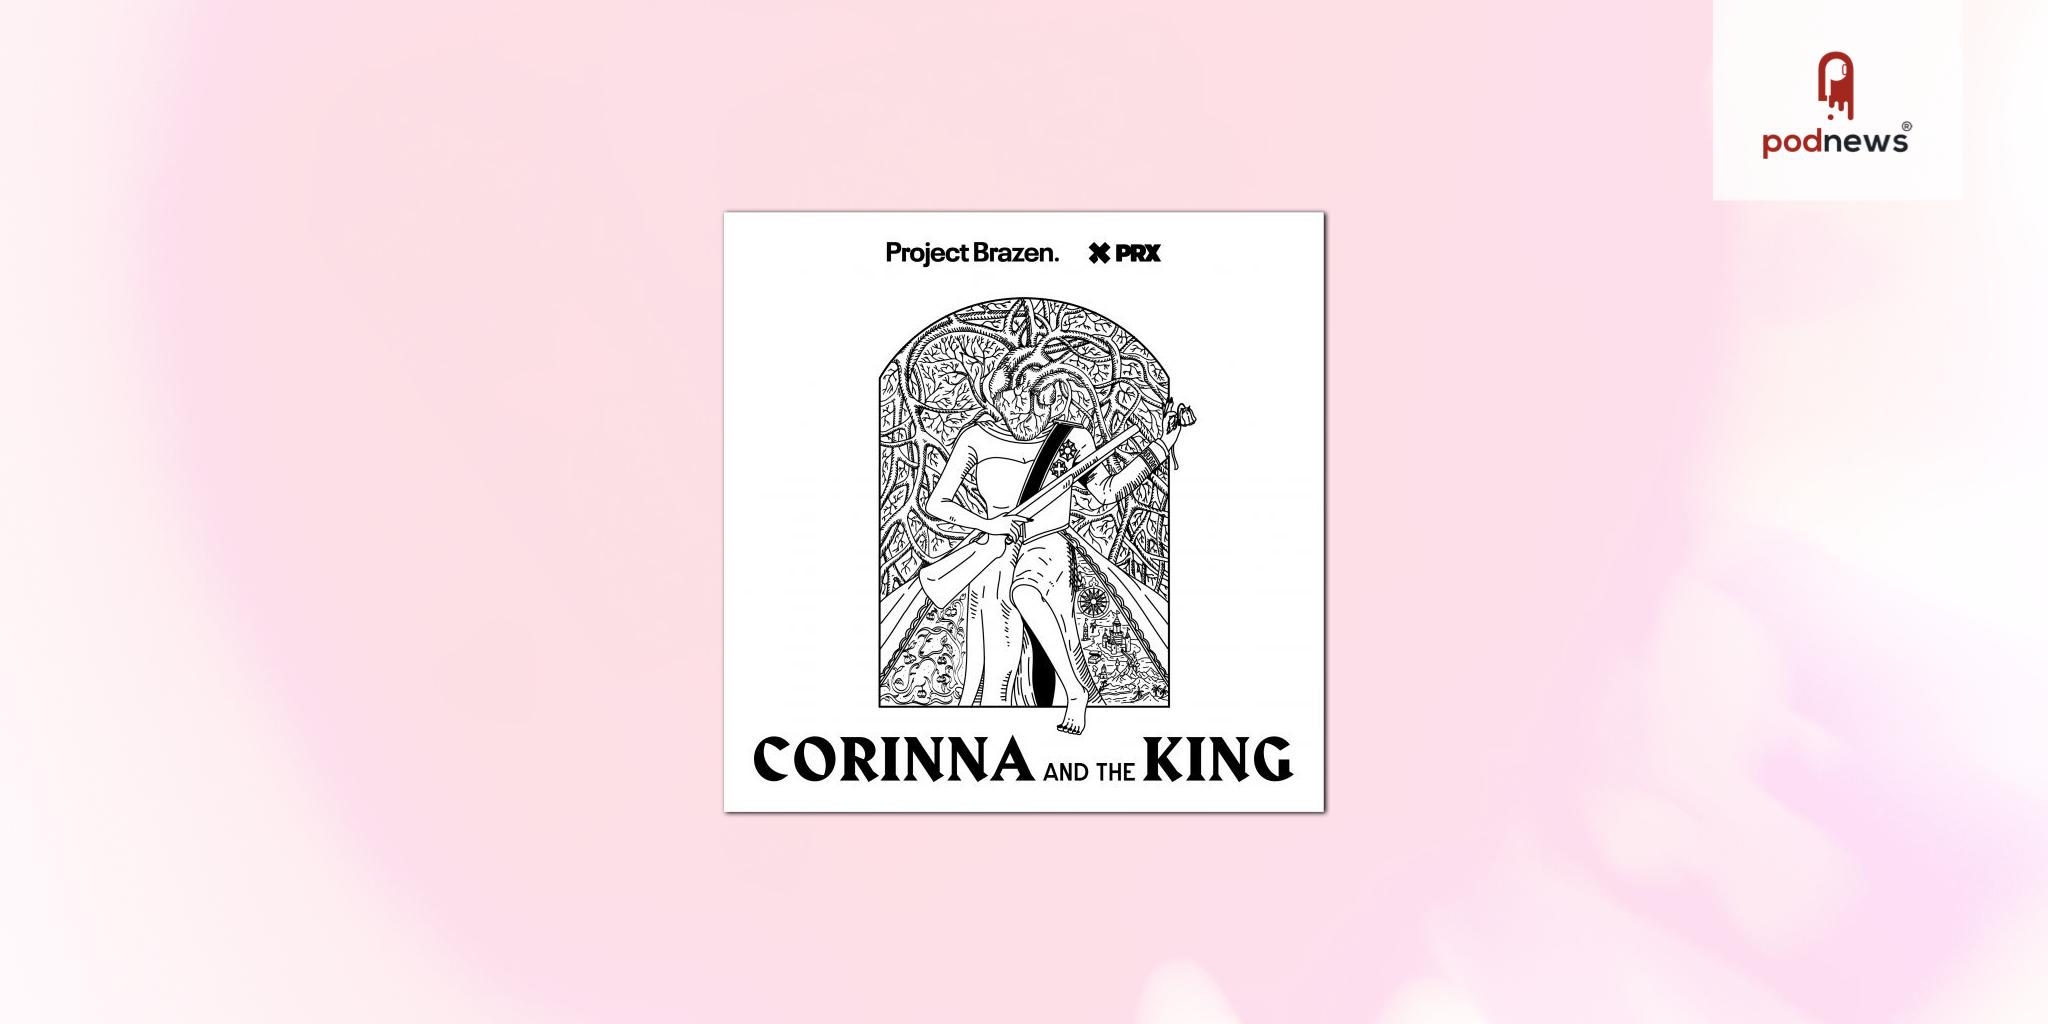 'Corinna and the King' podcast to chronicle the true story that shook the Spanish royal family to its core